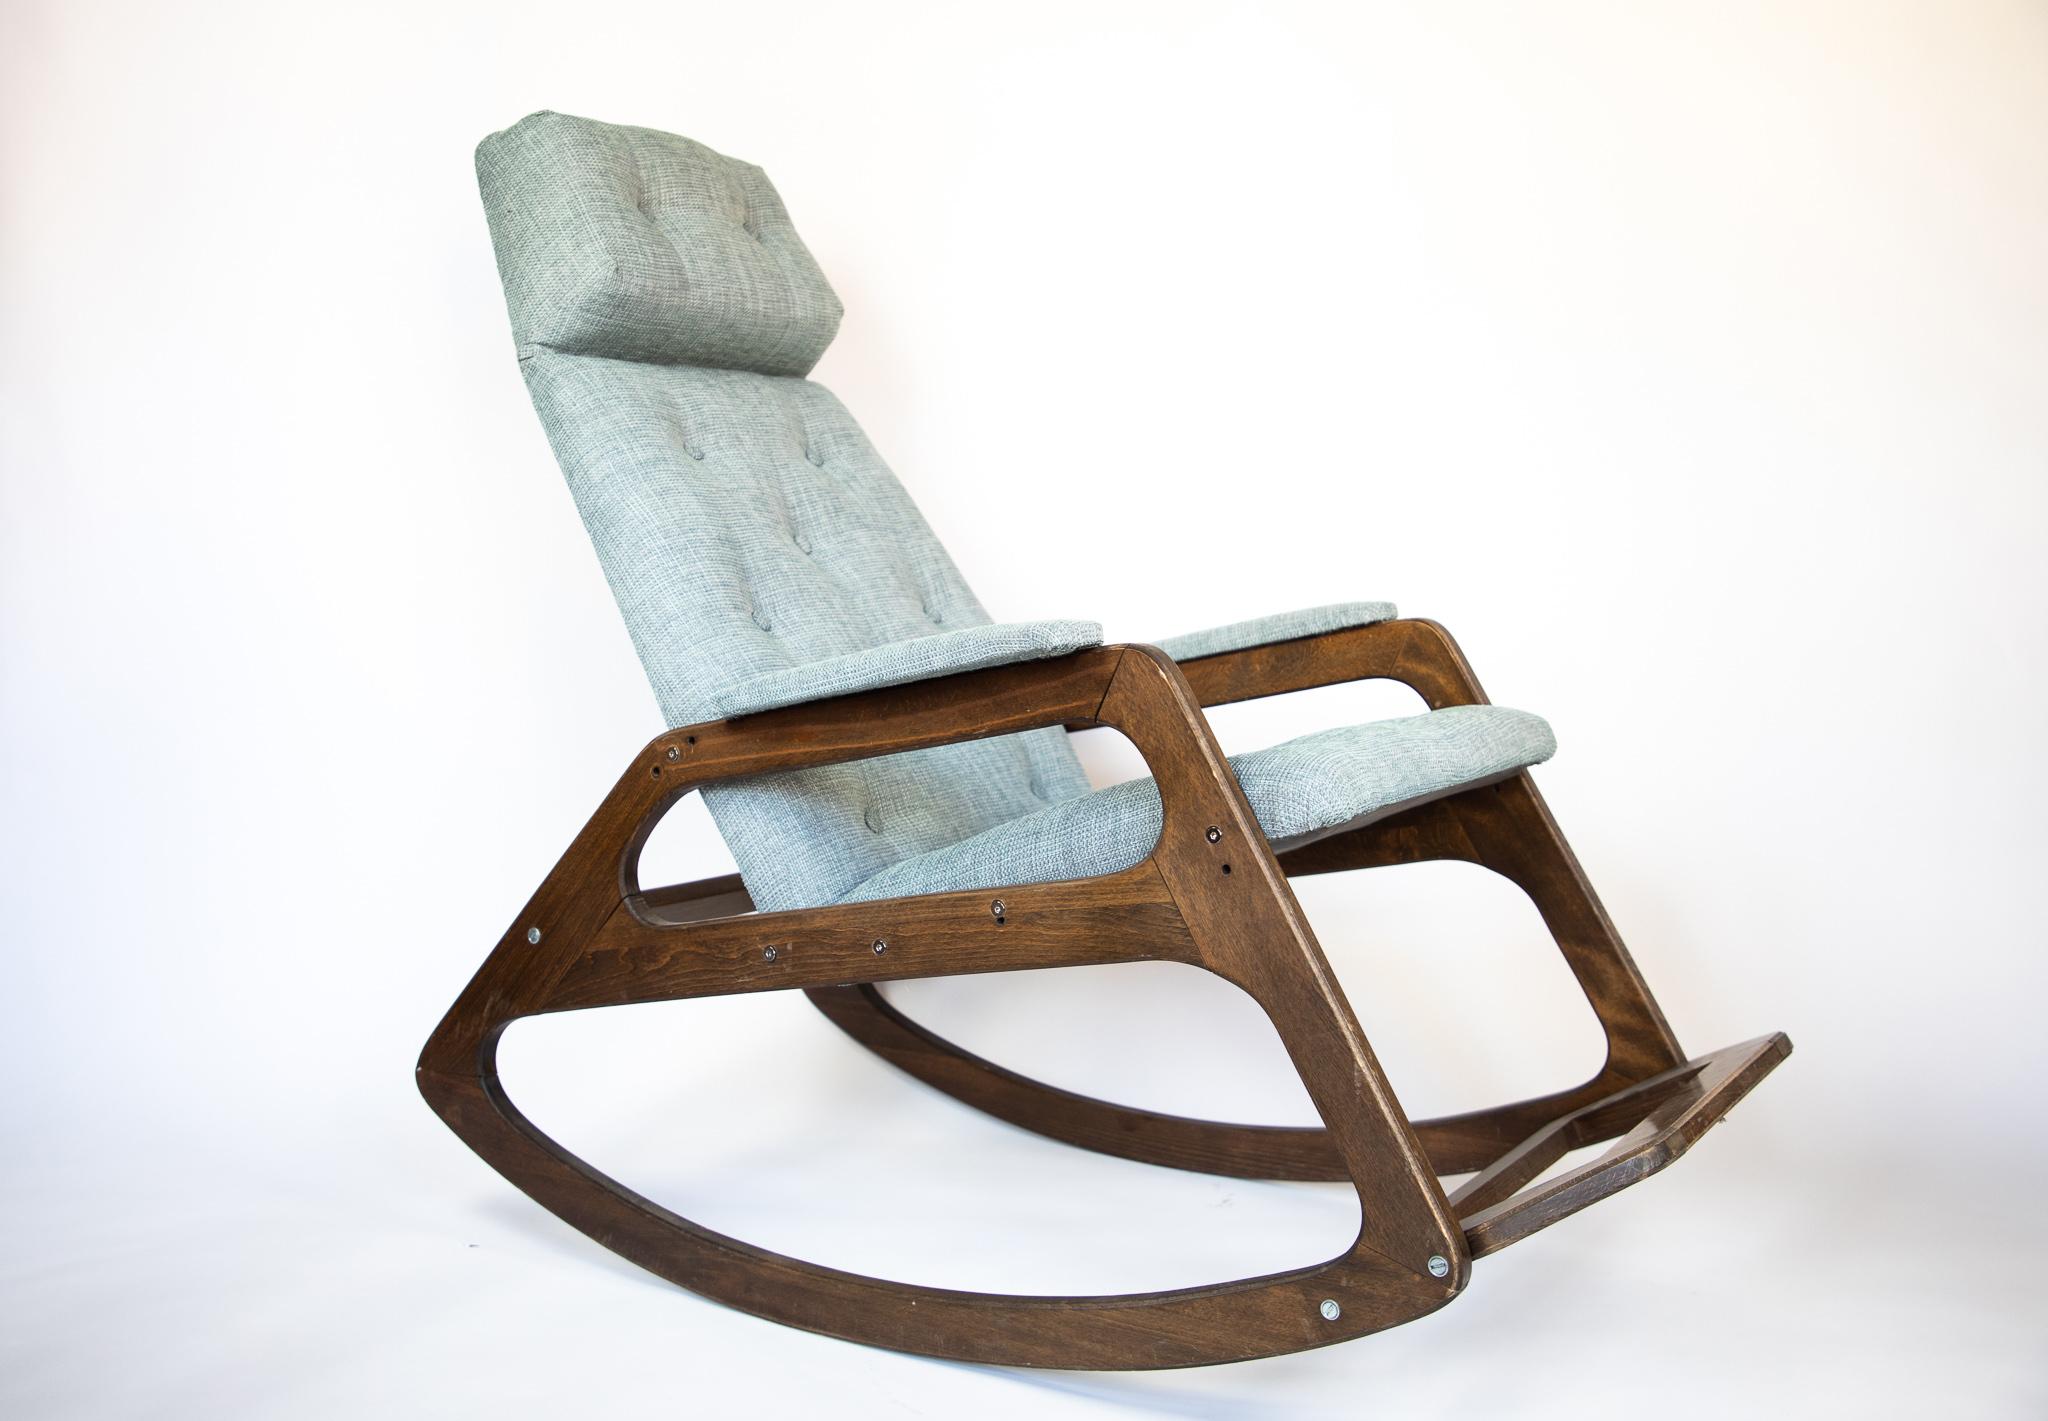 Mid Century Rocking Chair in Solid Wood and Ice Blue Reupholstery, Italy 1960s.

This lovely Mid Century Modern rocking chair with solid wood is highlighted by its one of a kind ice blue upholstery. Similar rocking chair designs are attributed to